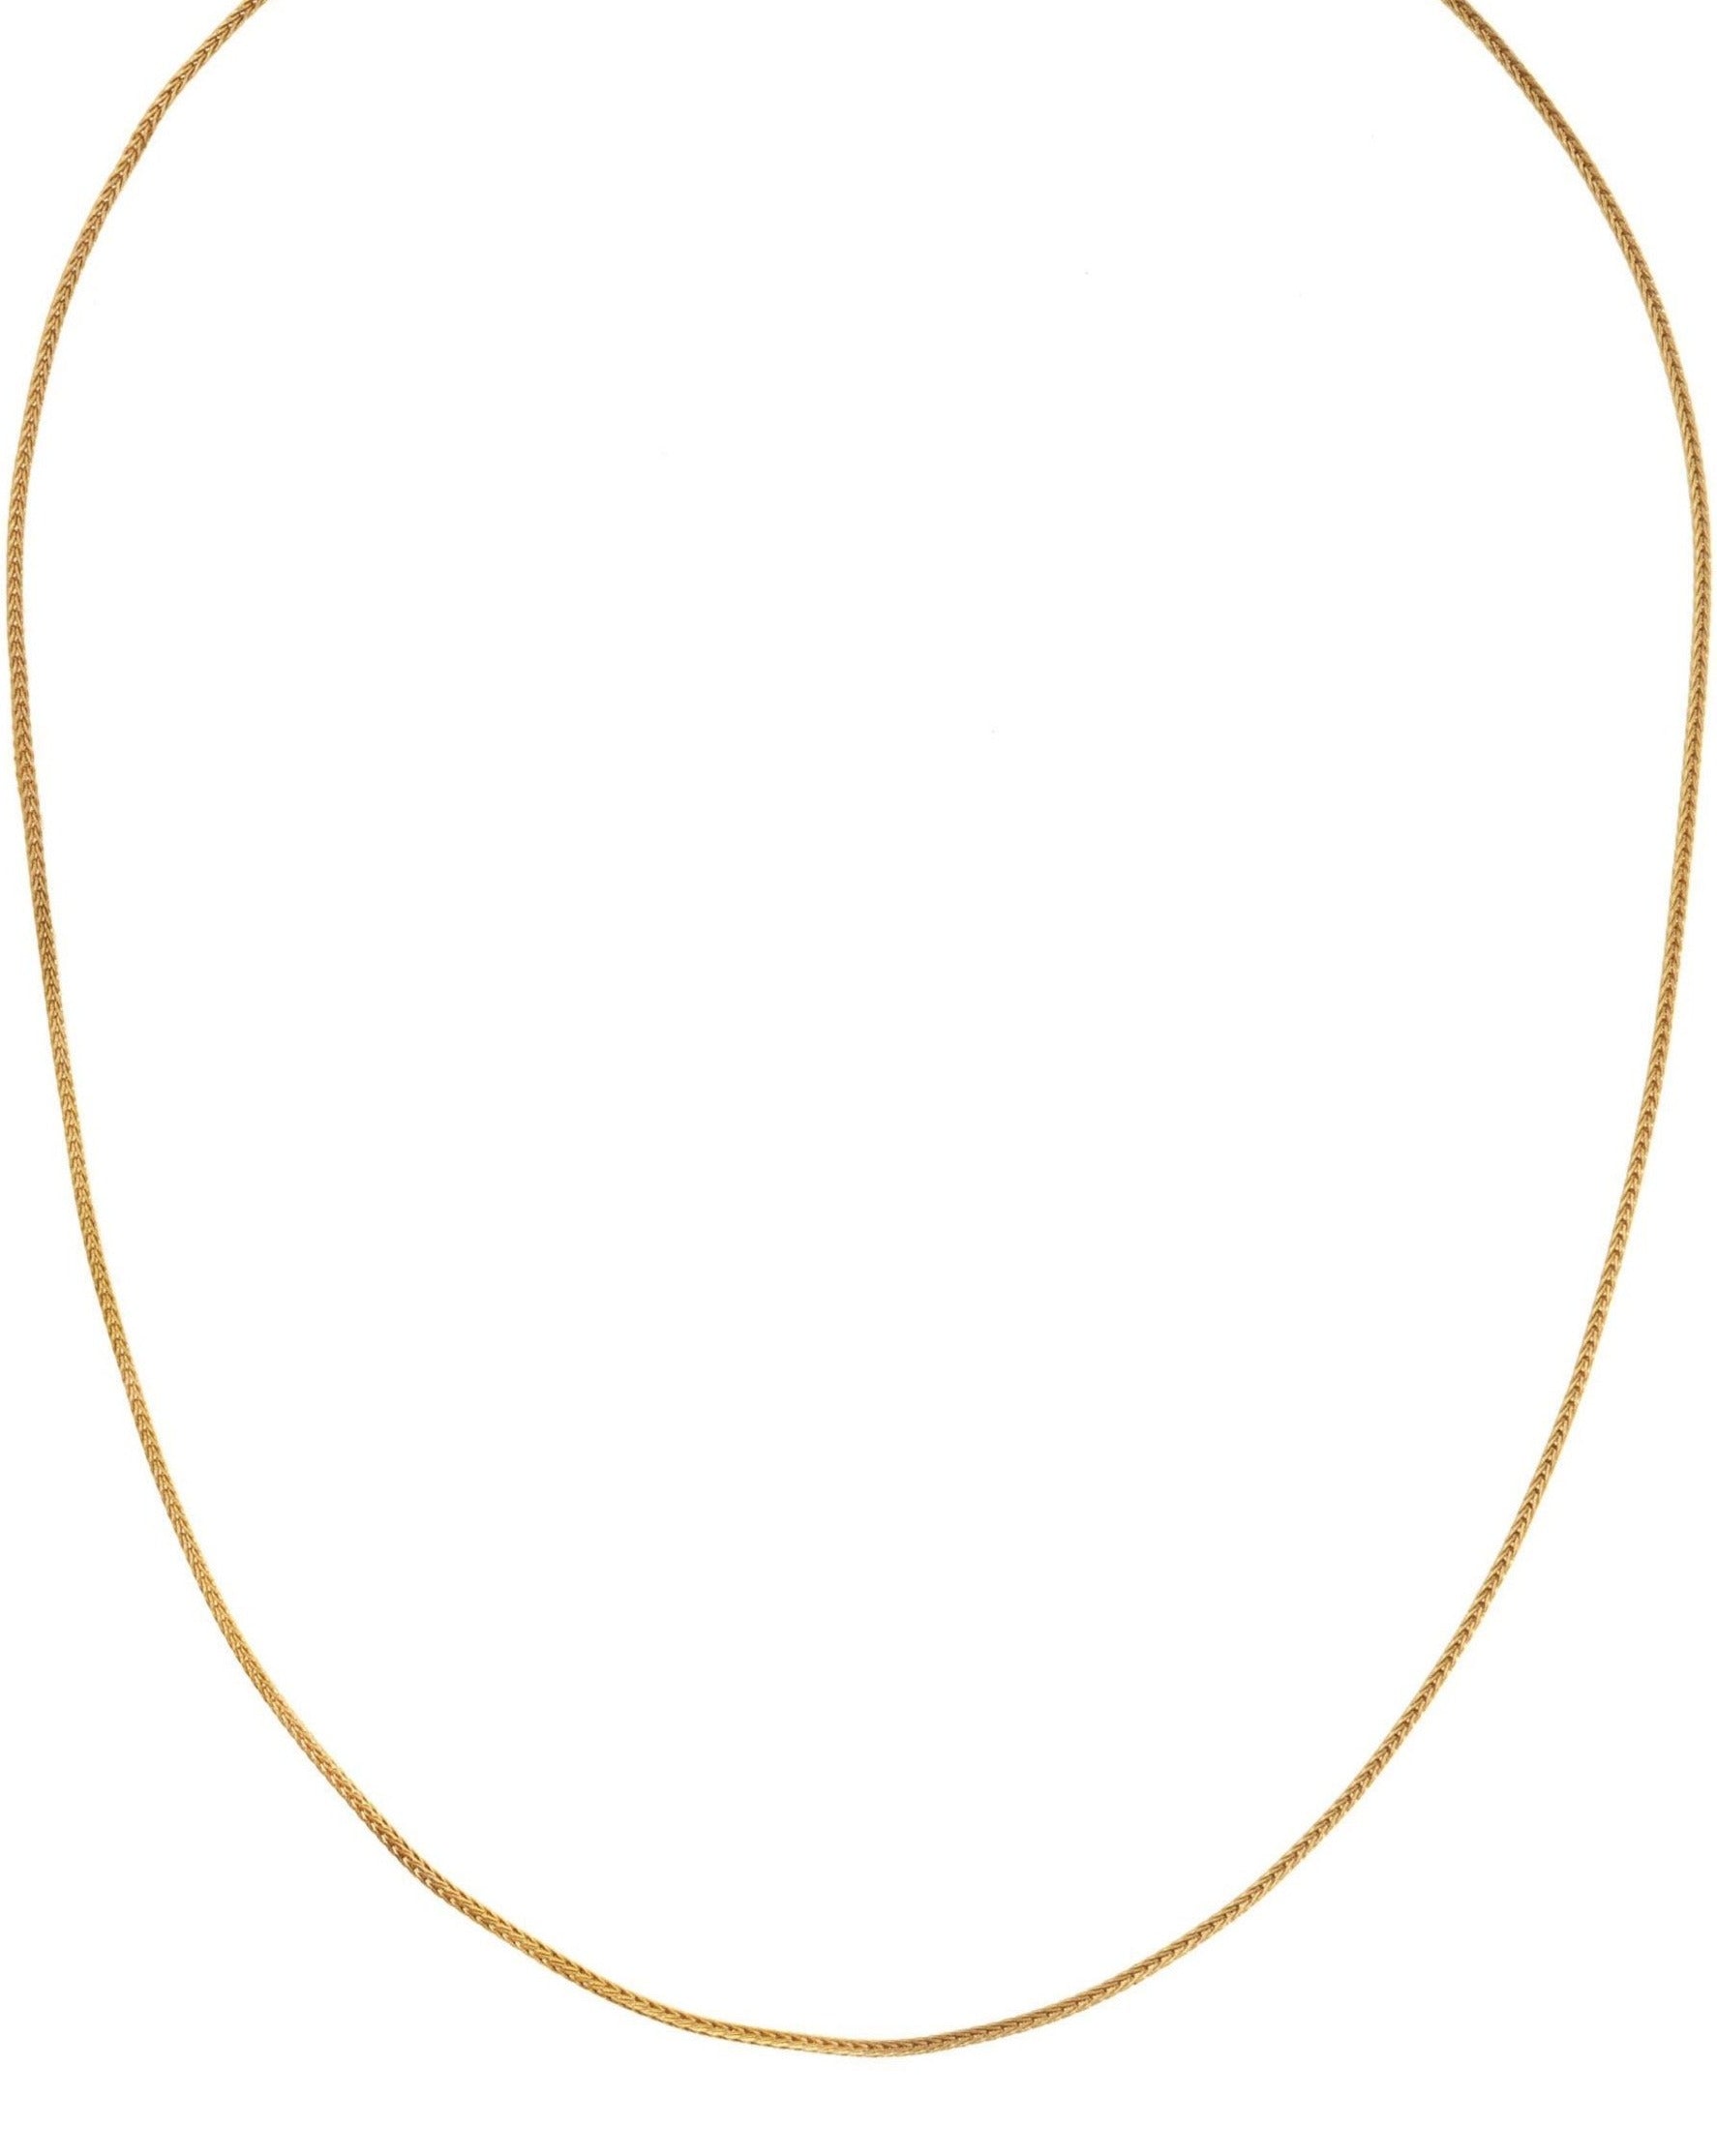 Arcadia Necklace by KOZAKH. A 15 to 17 inch adjustable length Rope chain necklace in 14K Gold Filled.